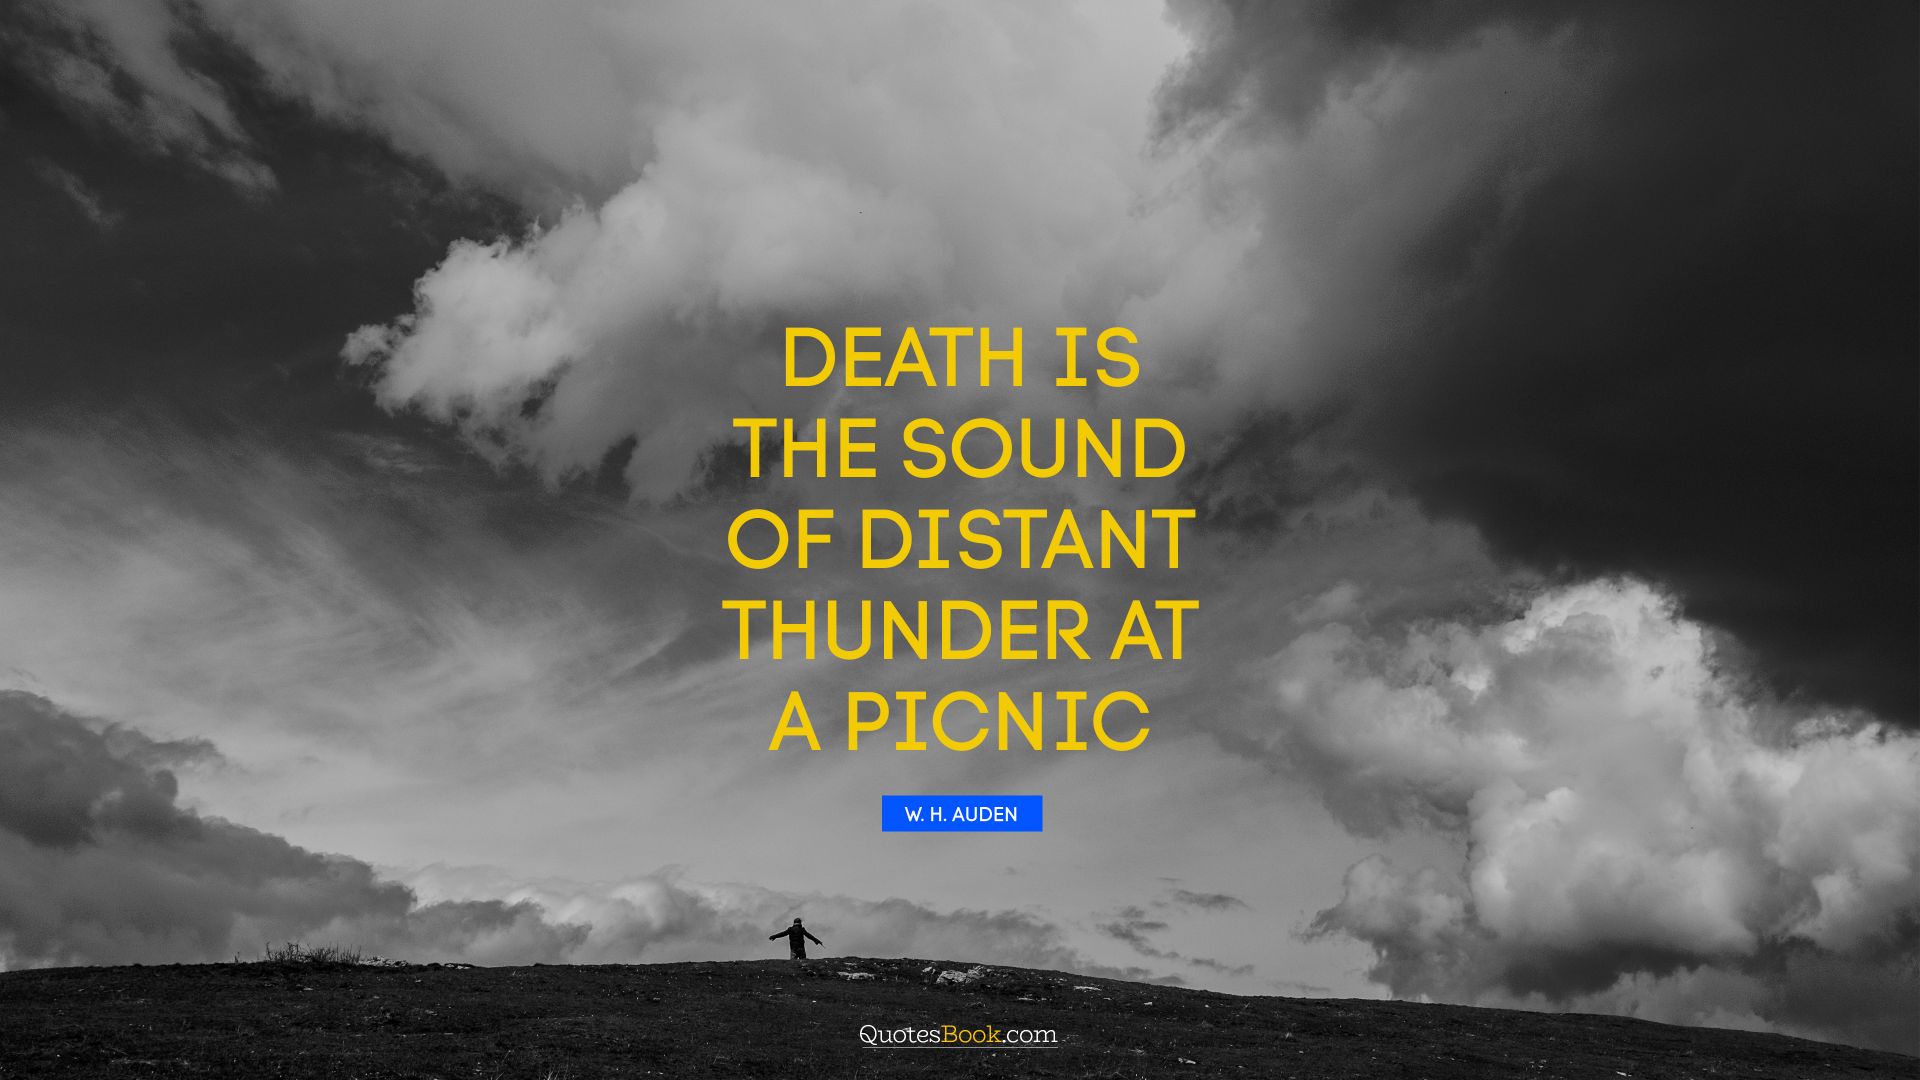 Death is the sound of distant thunder at a picnic. - Quote by W. H. Auden